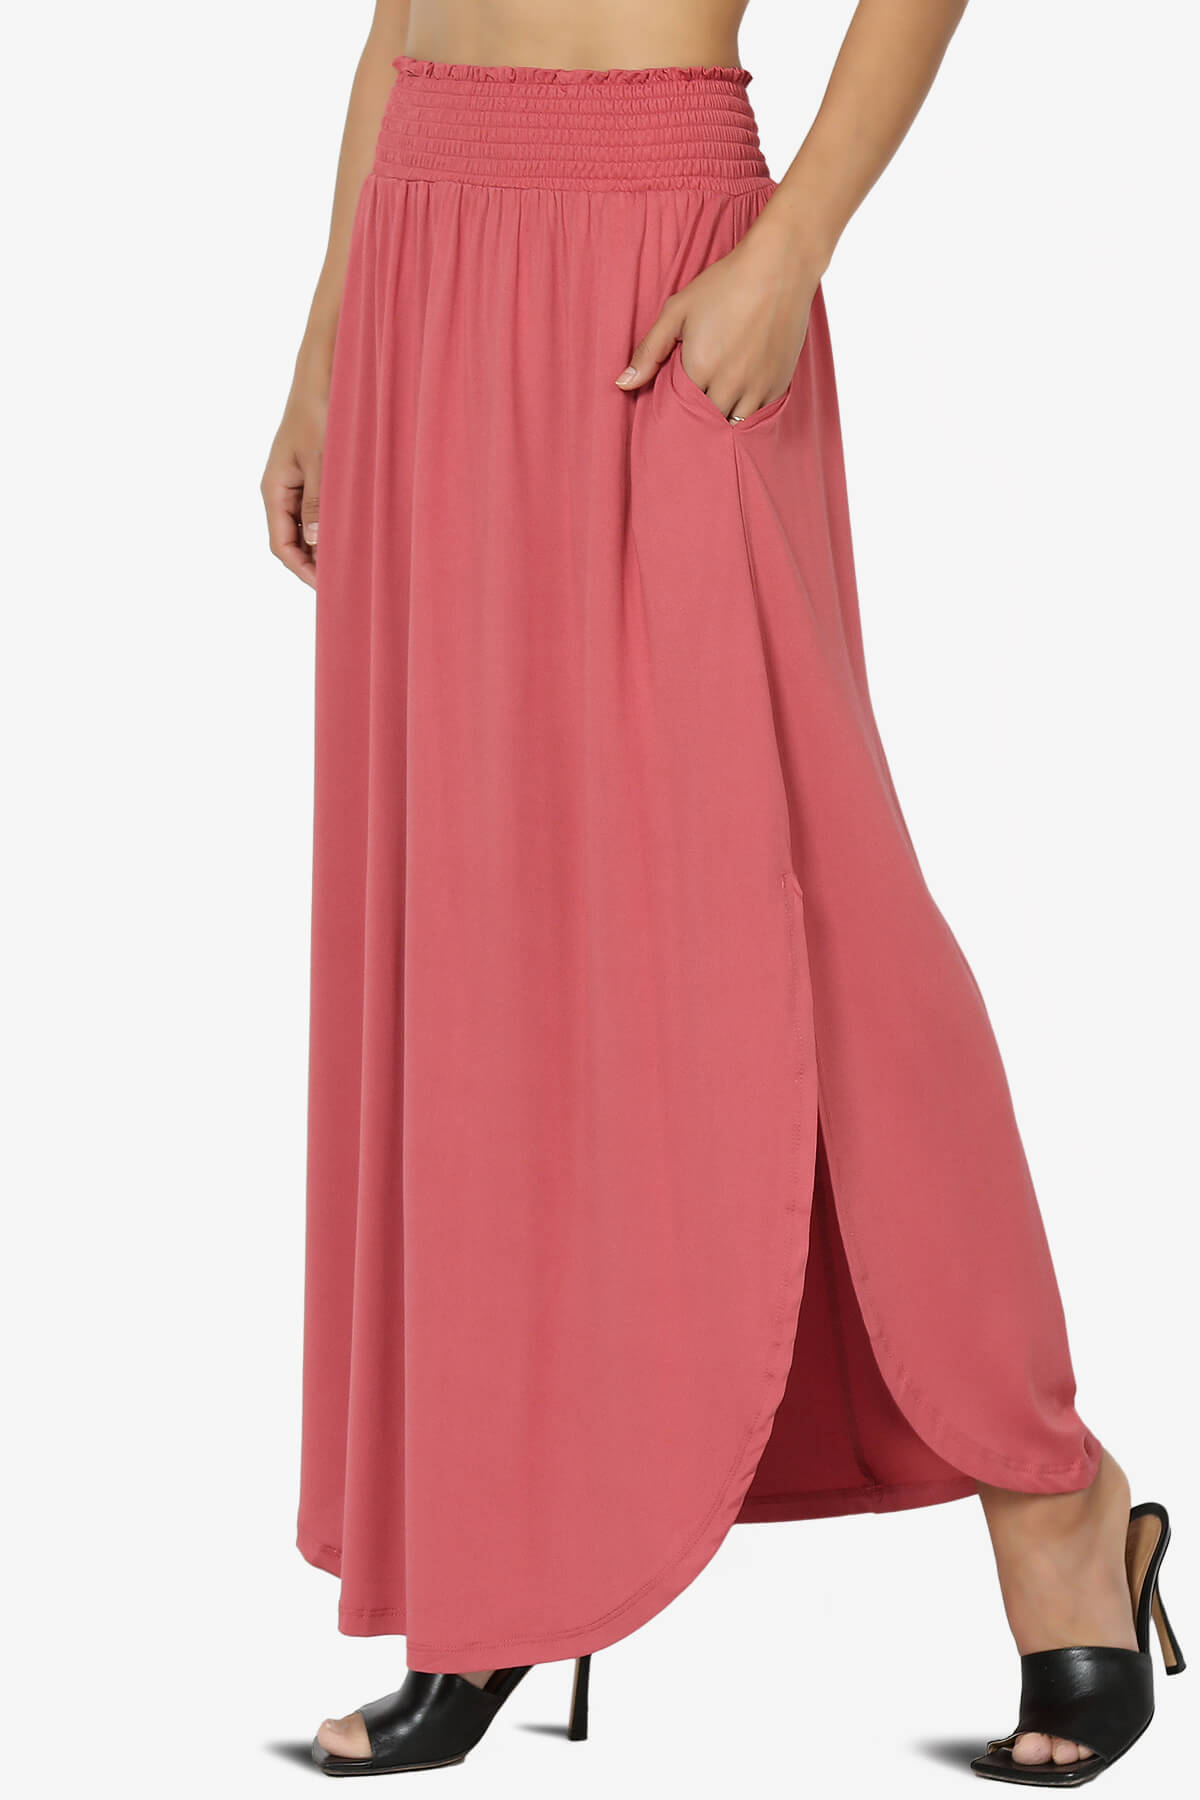 Load image into Gallery viewer, Alisah Smocked Waist Pocket Slit Maxi Skirt CRANBERRY_3
